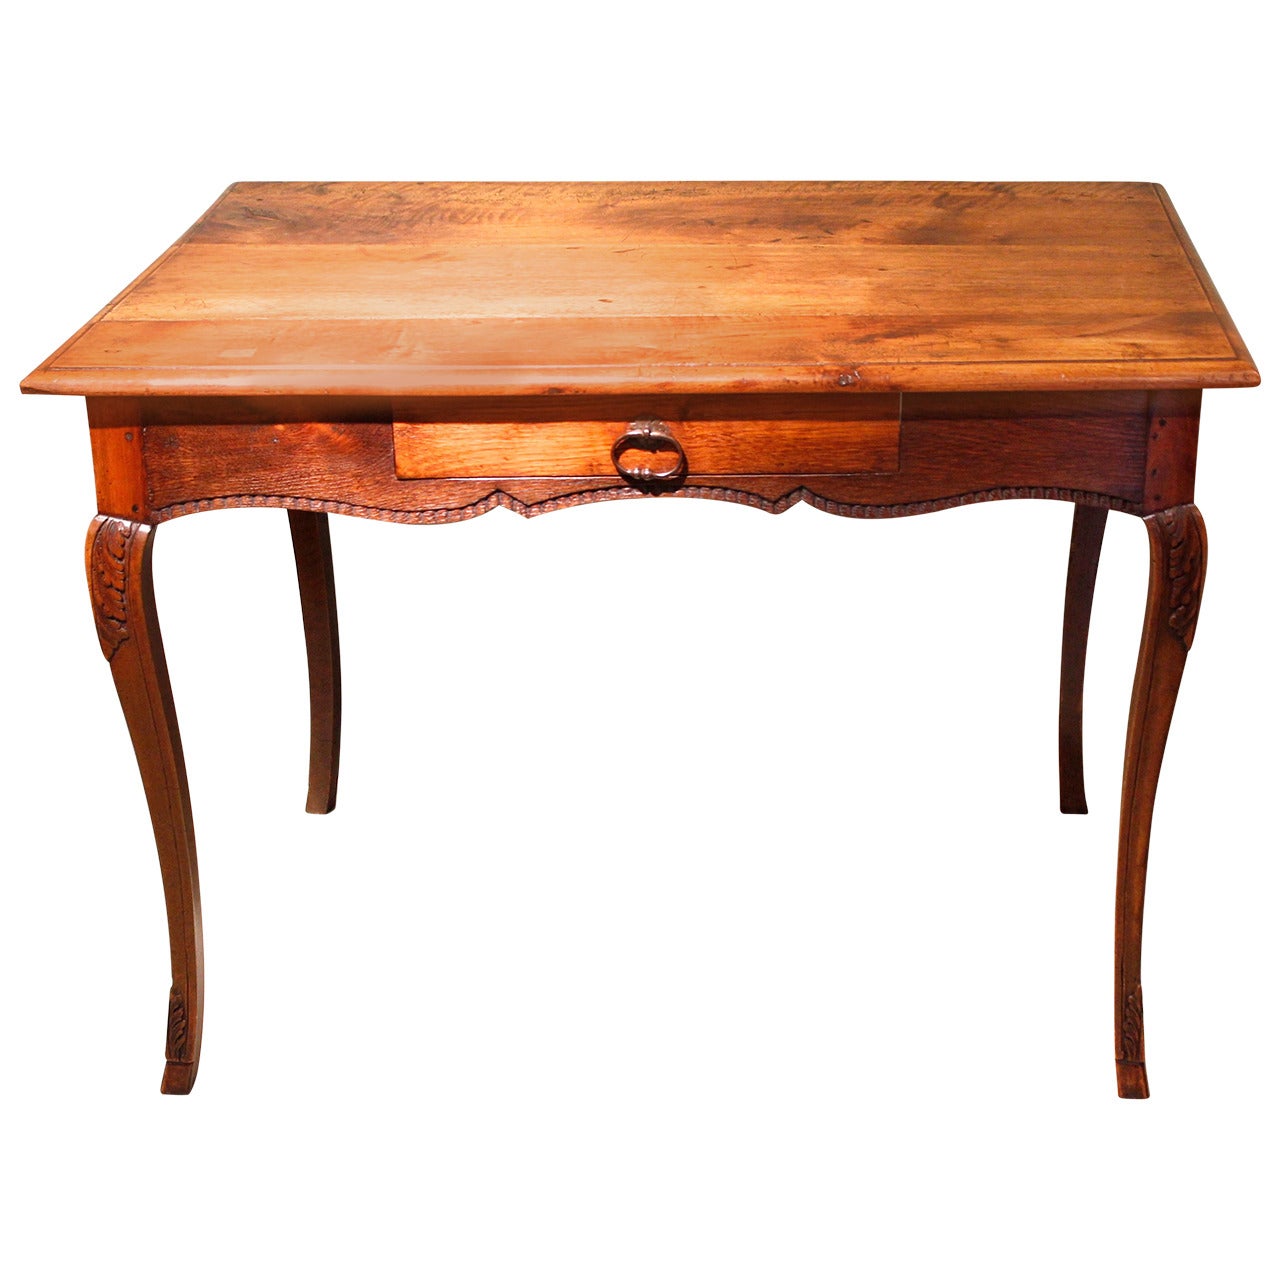 French Provincial Table with Hoof Feet, 19th Century For Sale